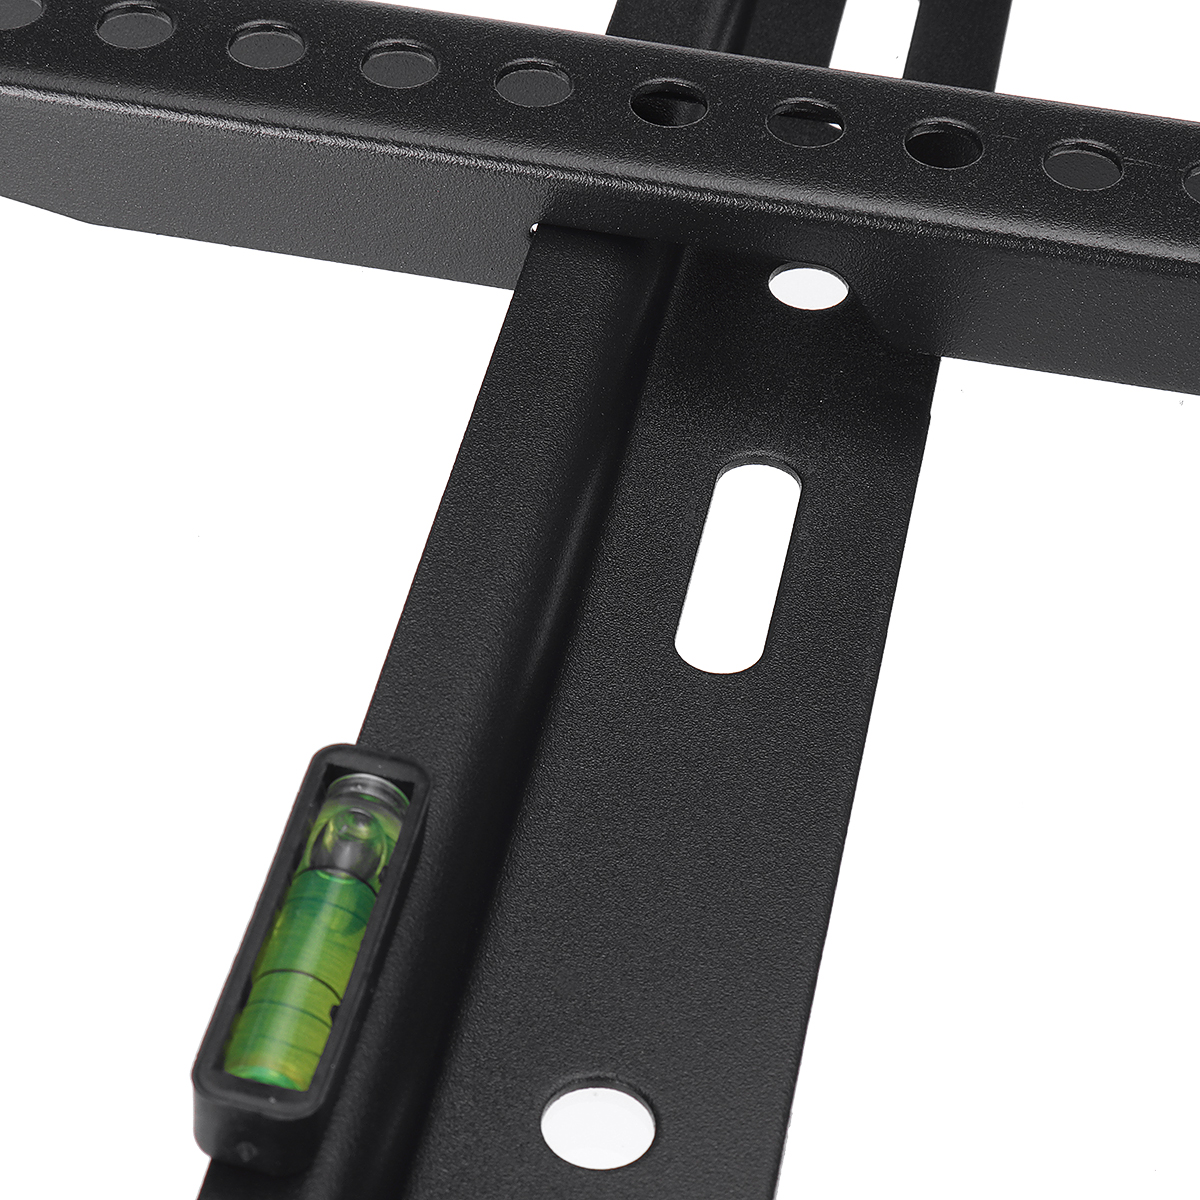 Find TV Wall Mount Monitor Bracket TV Stands with Horizontal Post Installation Leveling for 26 Inch to 60 Inch TVs for Sale on Gipsybee.com with cryptocurrencies